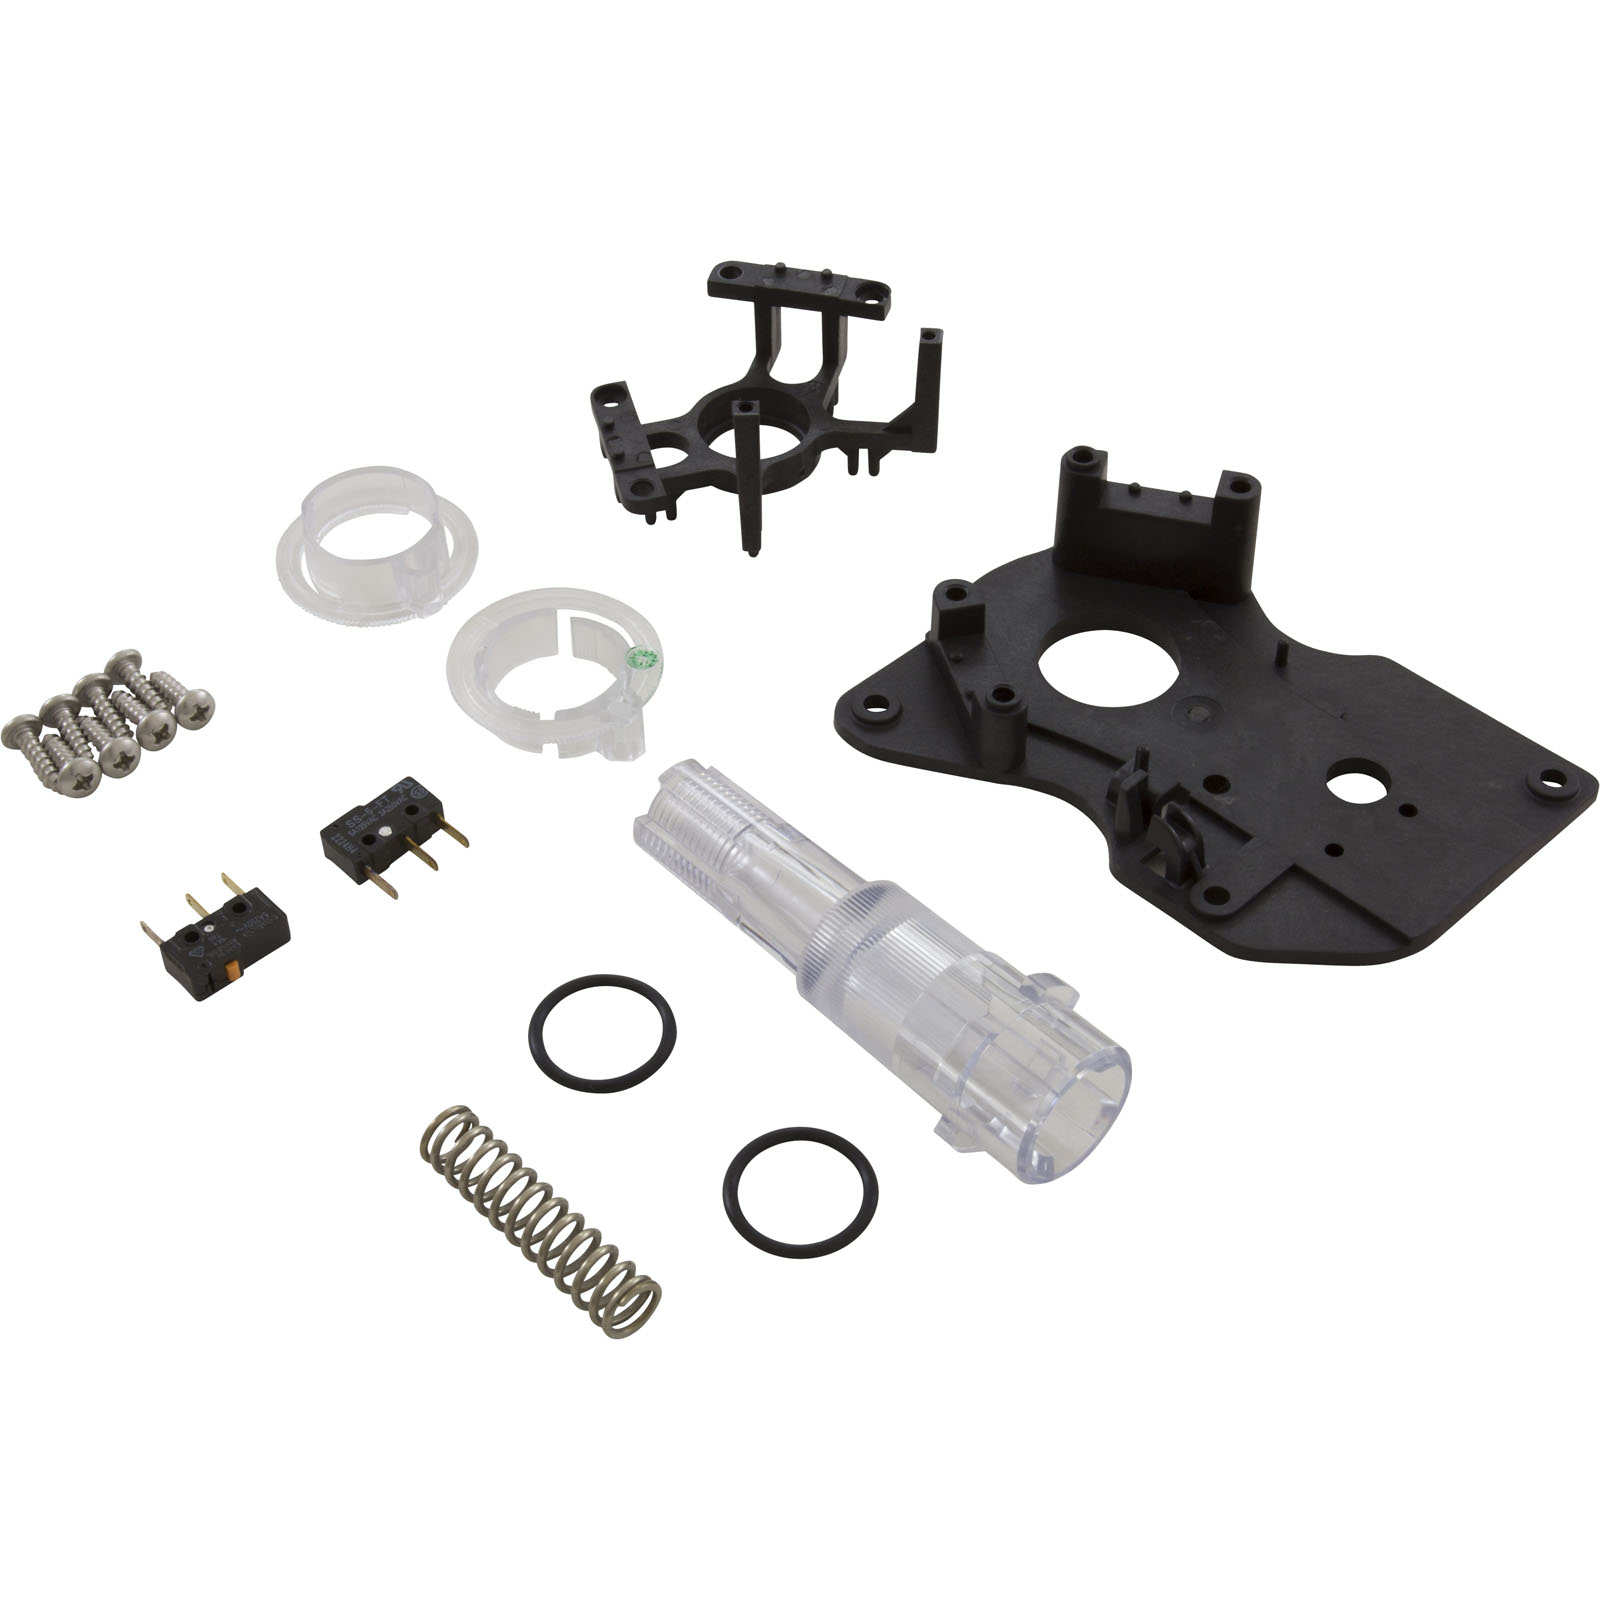 Picture of Center Plate Kit, Jandy Valve Actuator